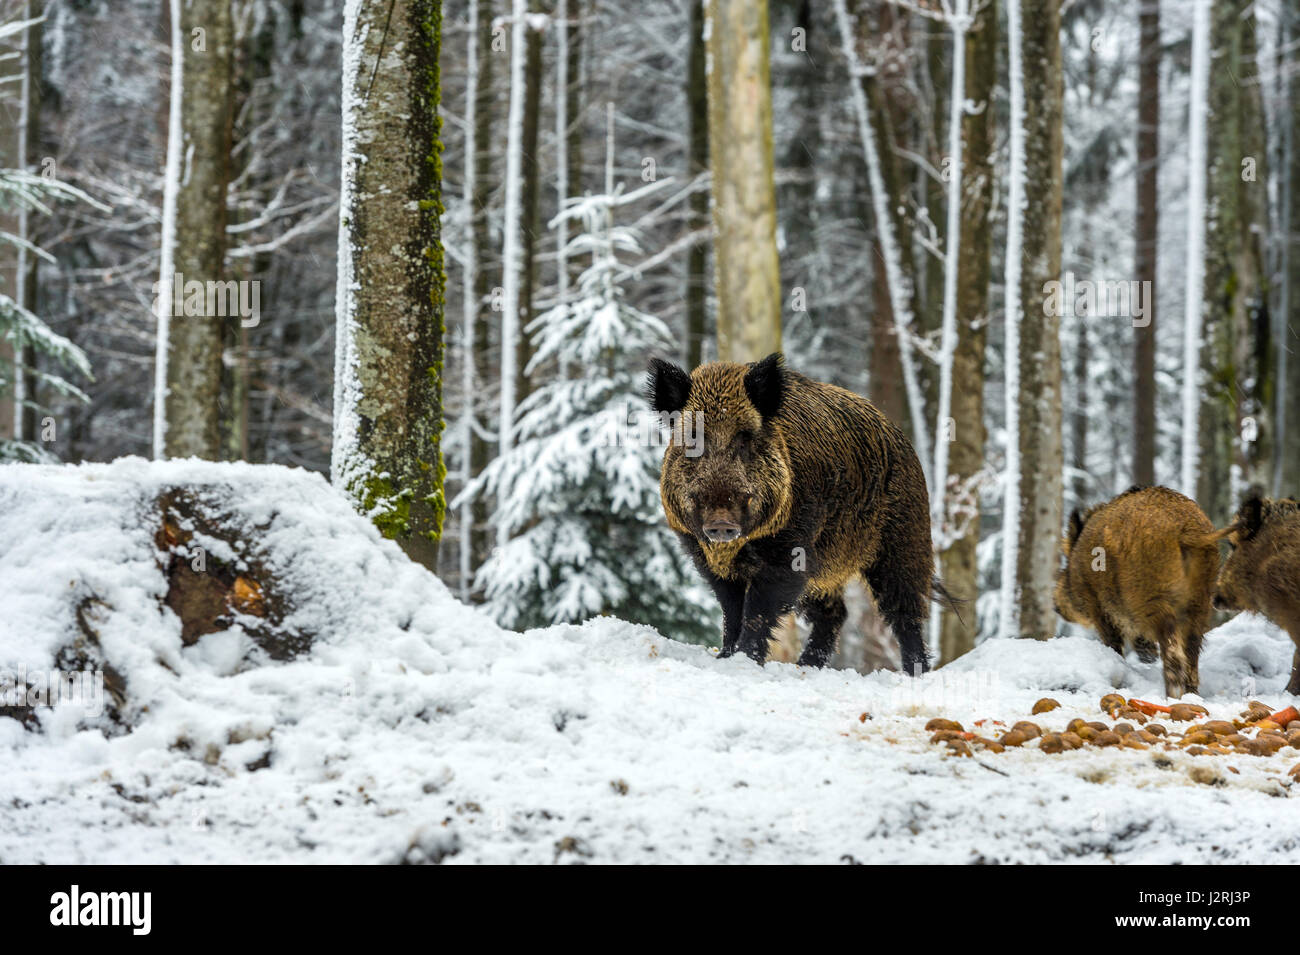 Eurasian Wild Boar (Sus scrofa) standing ground and foraging  in a snow covered woodland in mid winter, Stock Photo